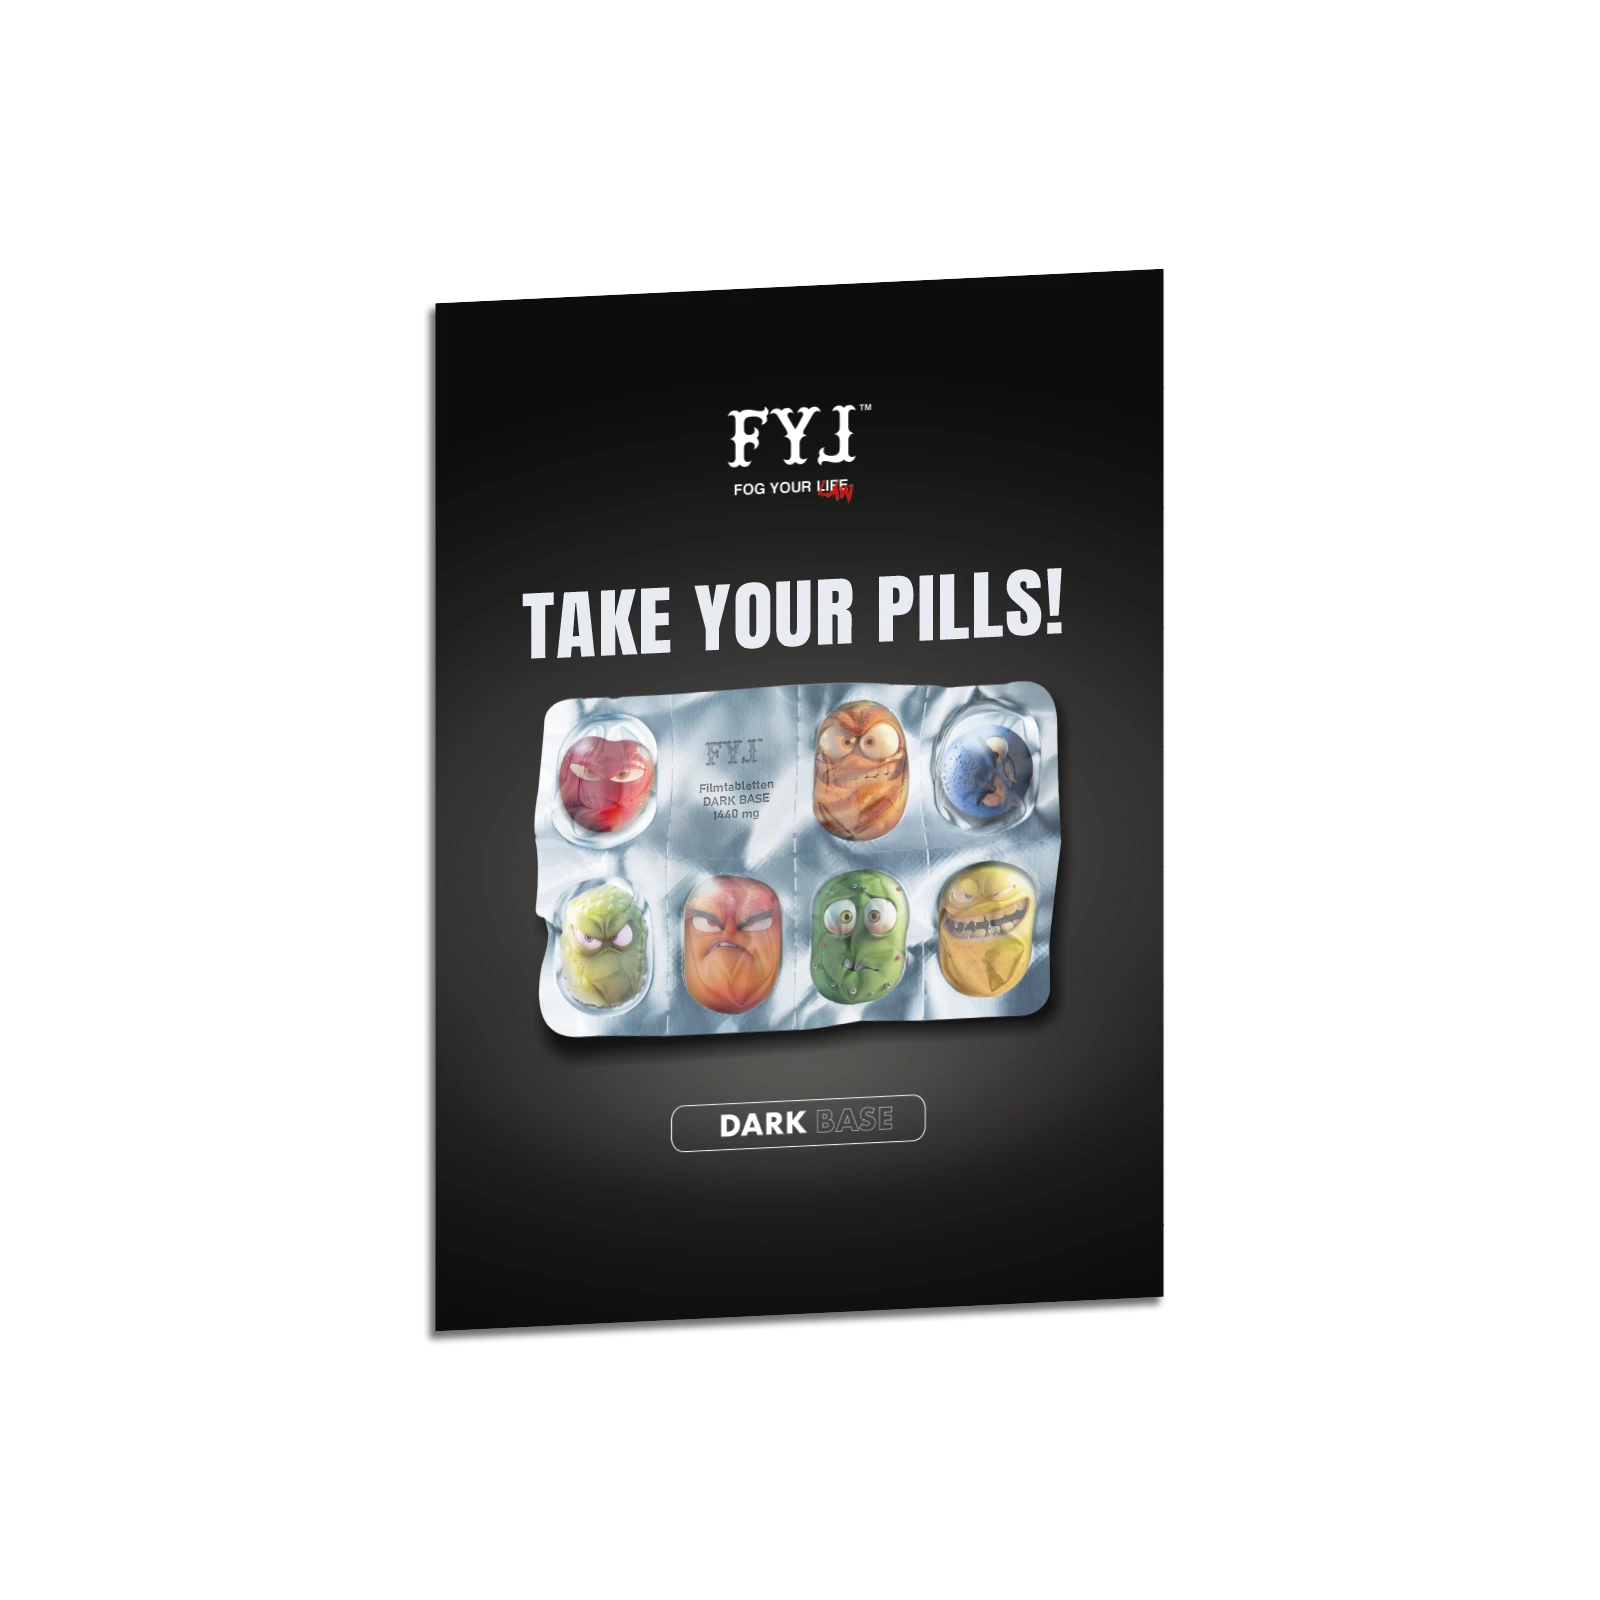 Hookain Poster - A3 - Take Your PillsHookain Poster - A3 - Take Your Pills